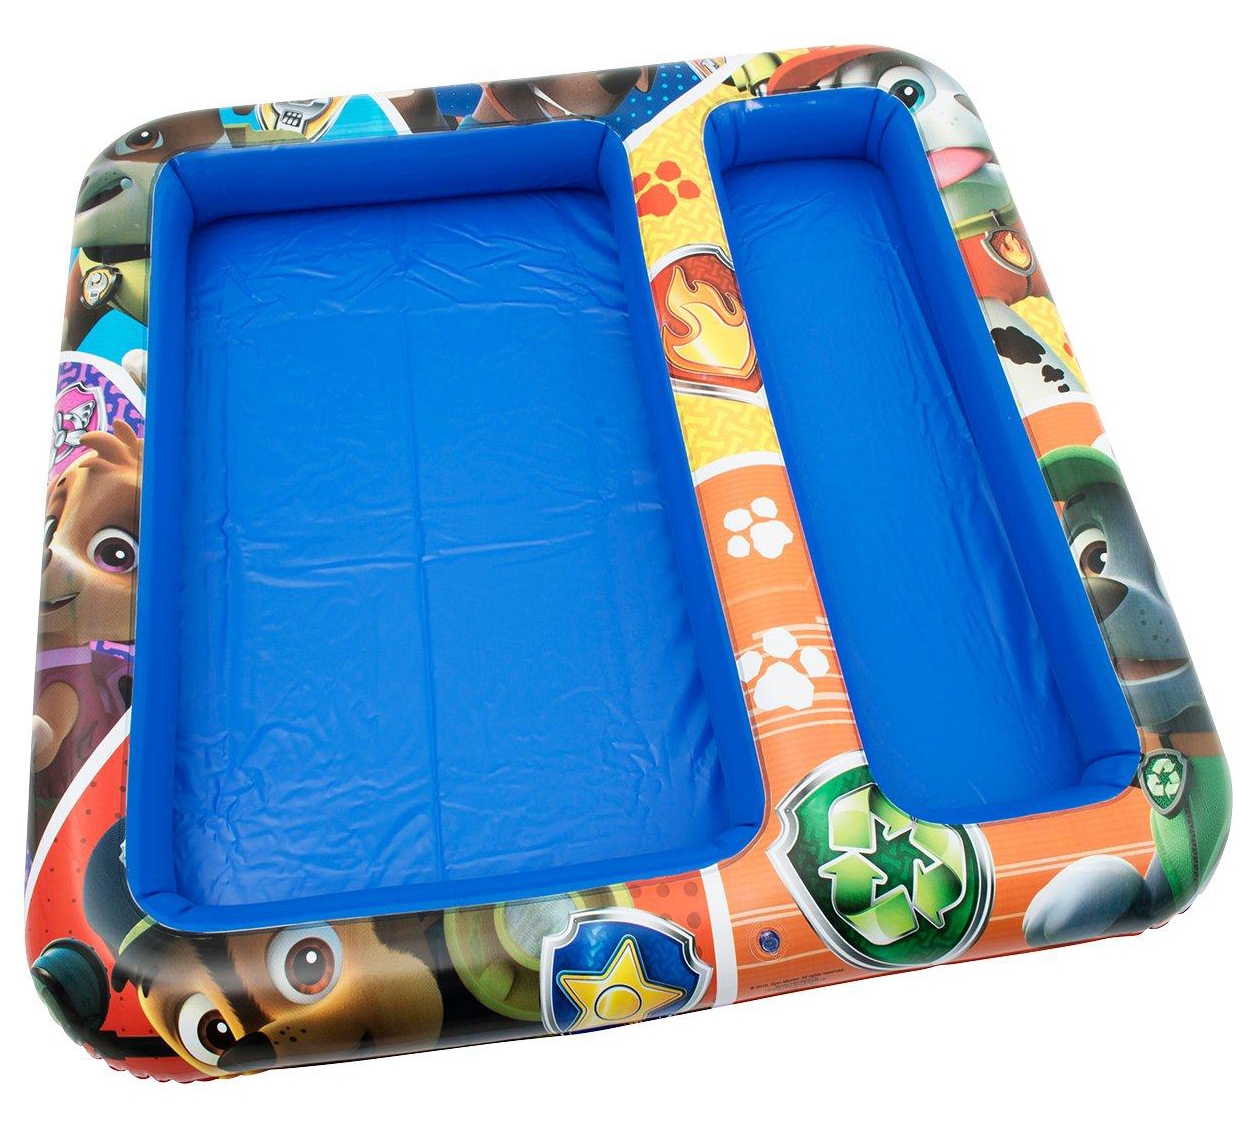 Paw Patrol Inflatable 'Sand & Water' Play Mat Toy